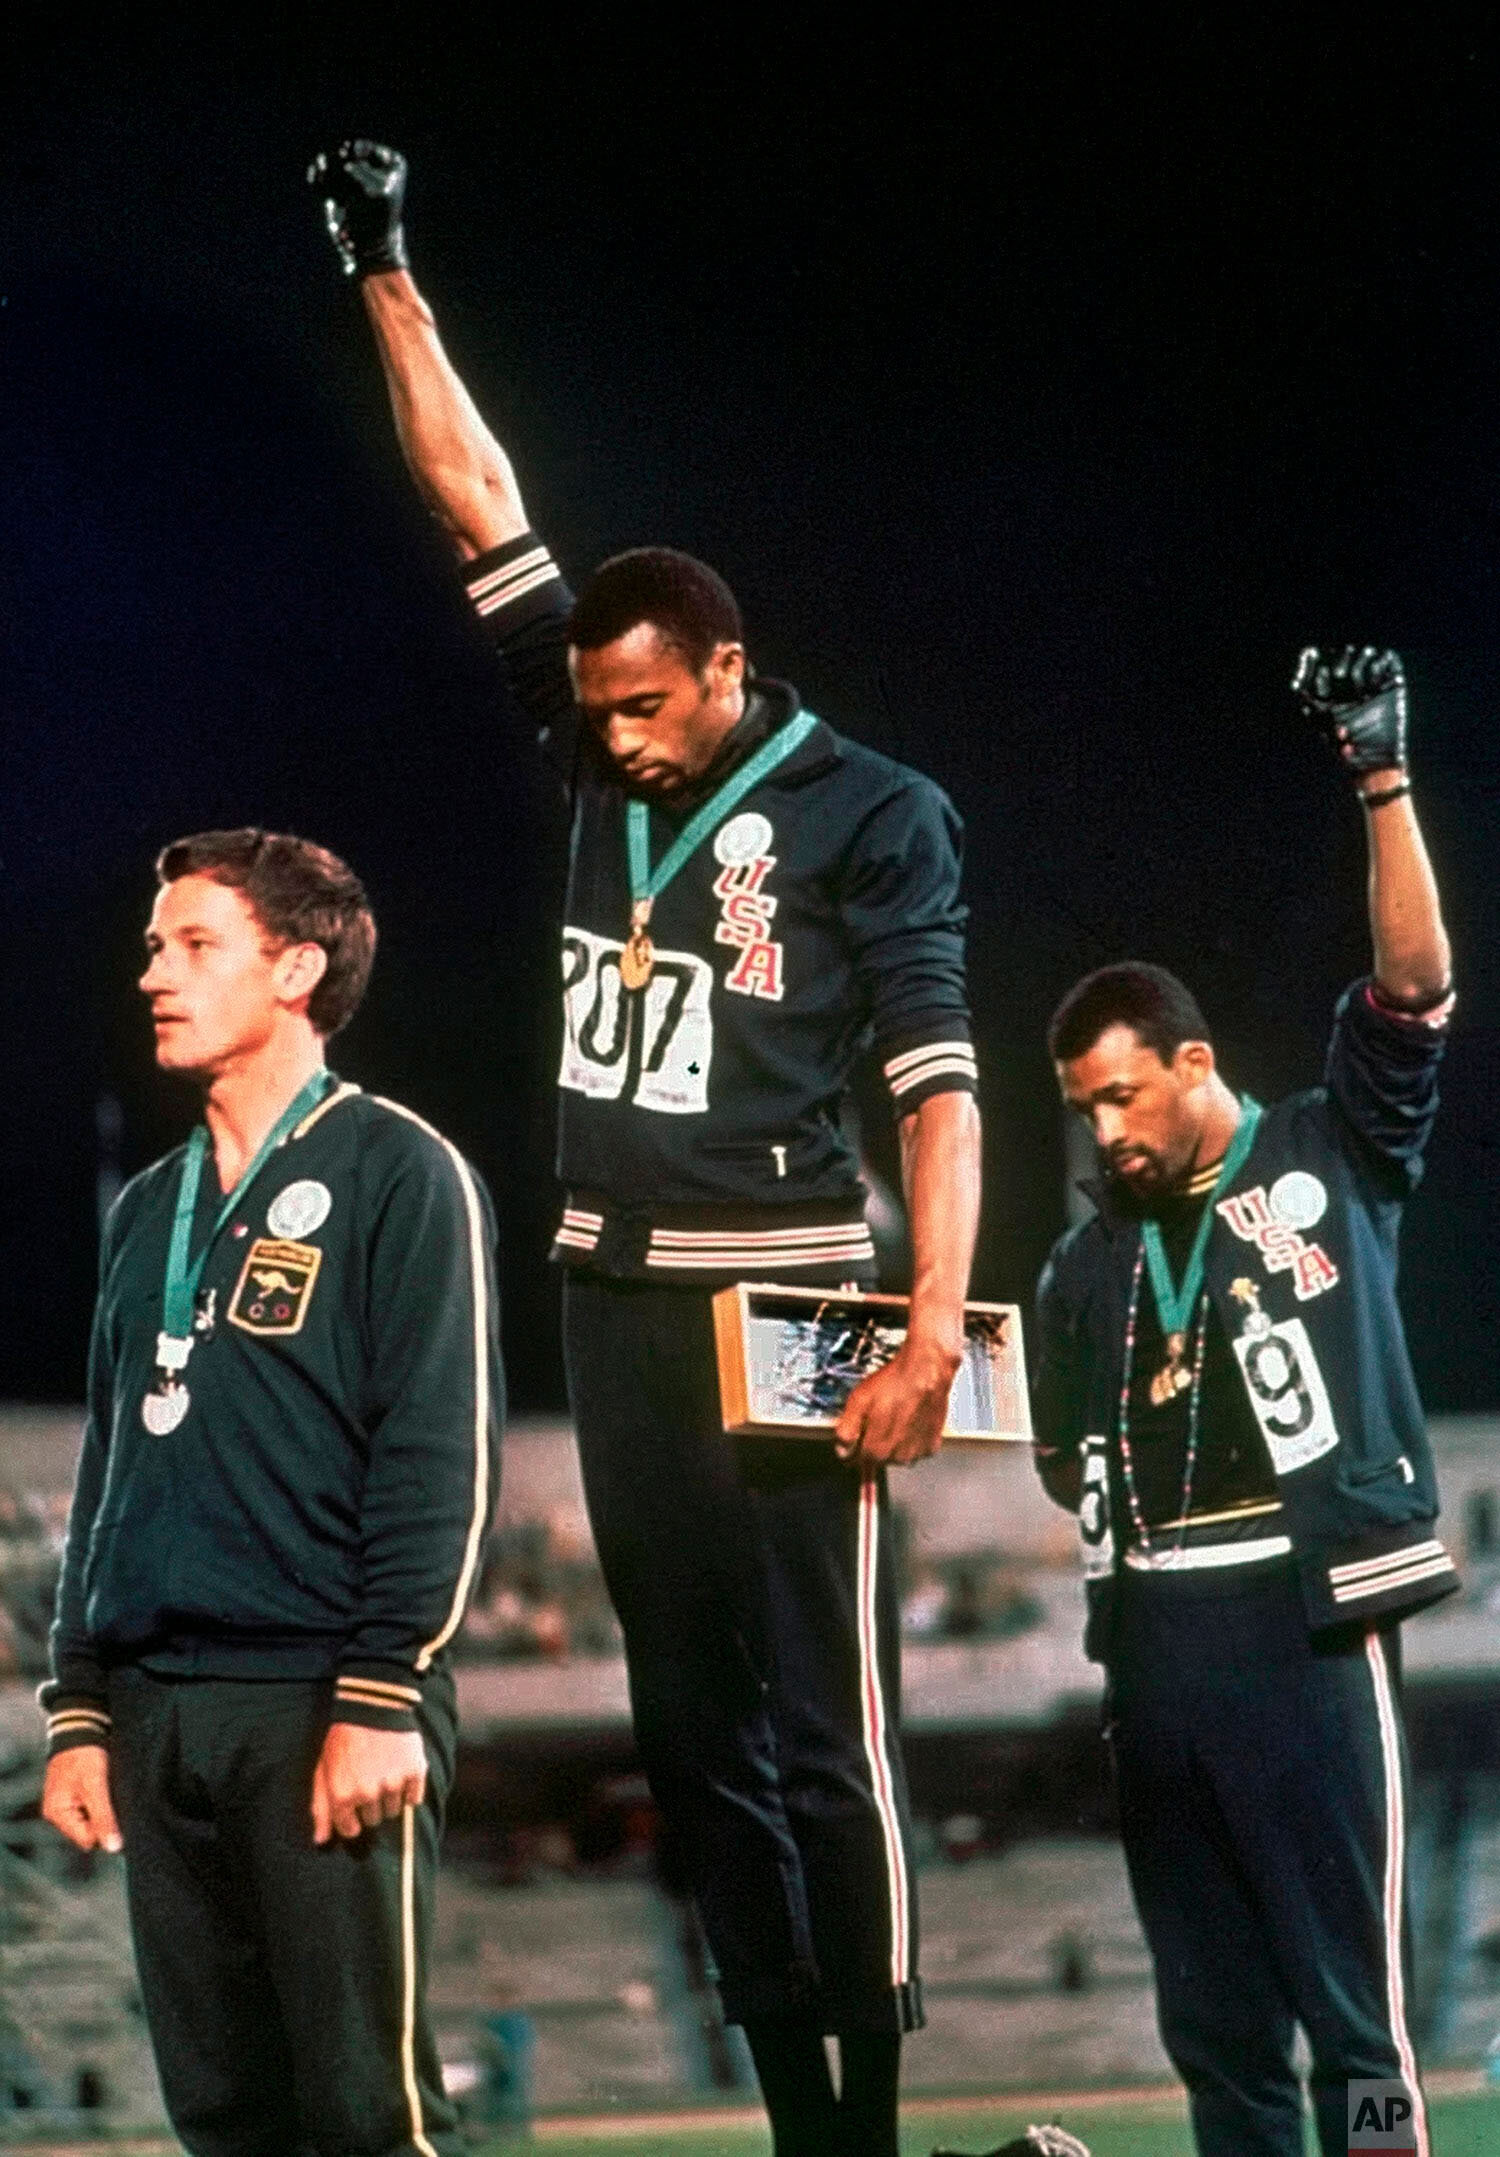  Extending gloved hands skyward in racial protest, U.S. athletes Tommie Smith, center, and John Carlos stare downward during the playing of national anthem Wednesday, Oct. 16, 1968, after Smith received the gold and Carlos the bronze for the 200 mete